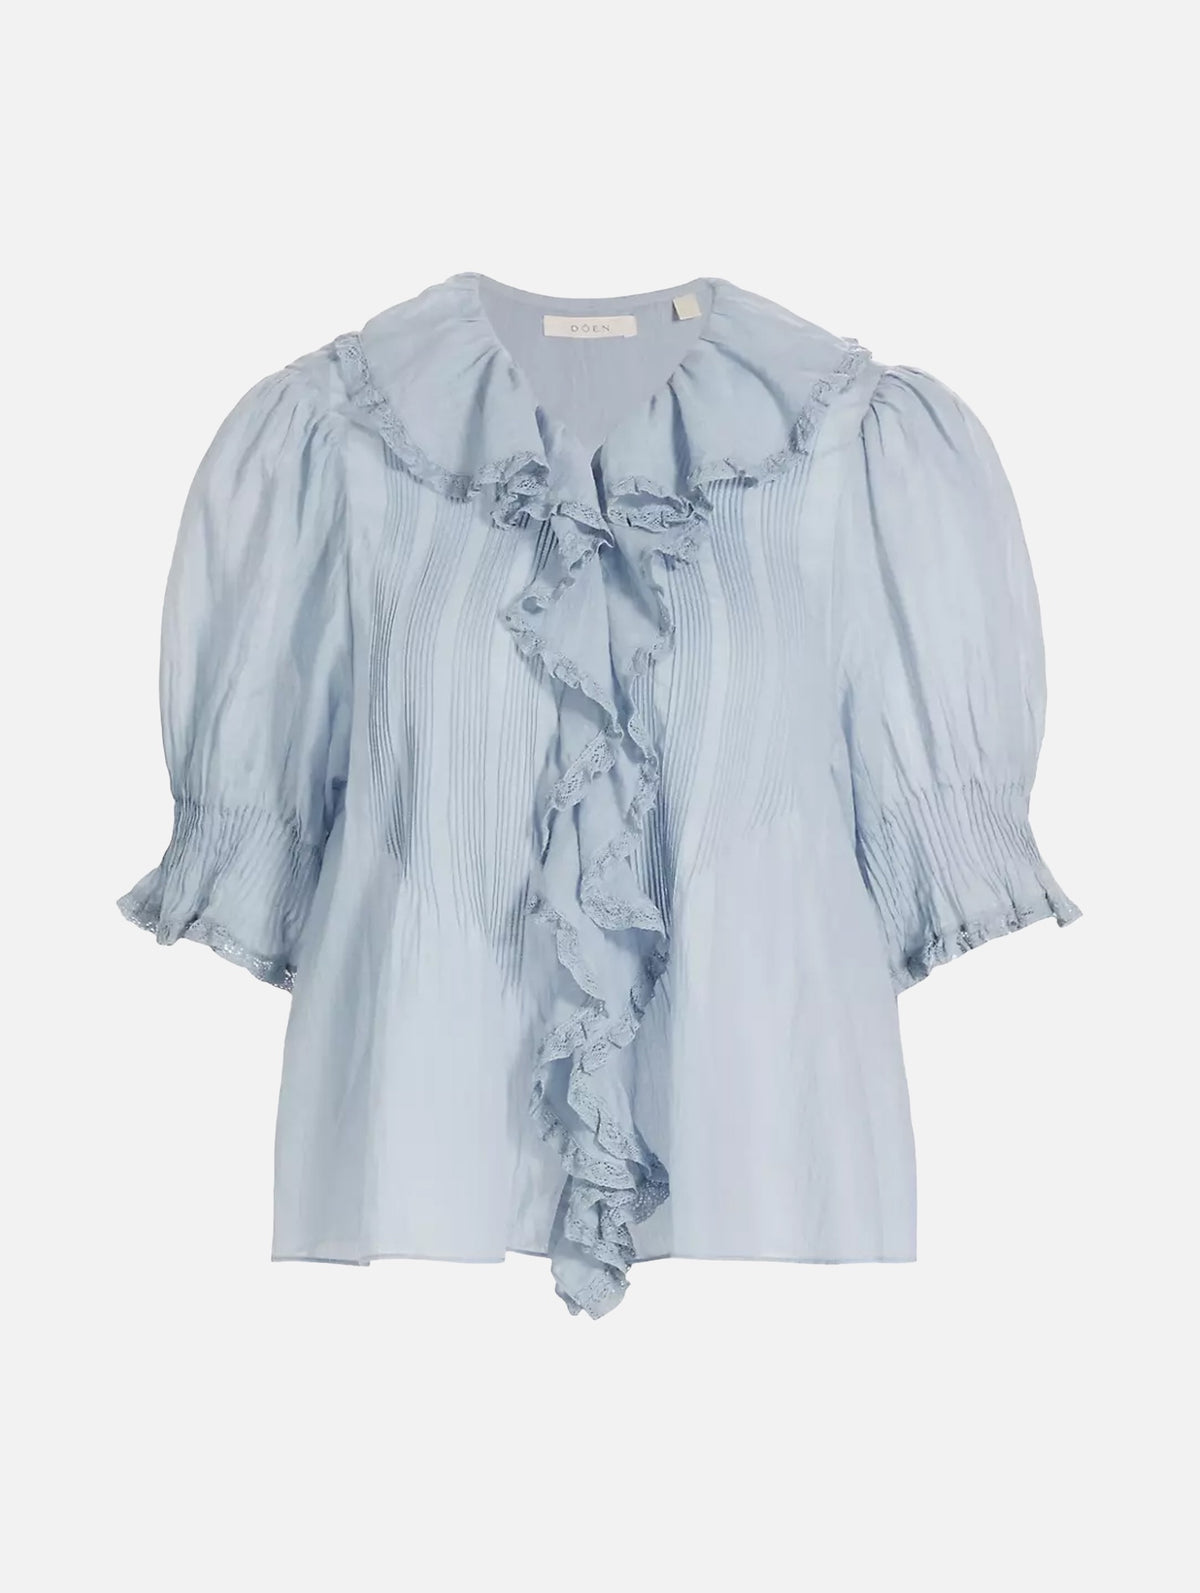 Henri Top in French Blue